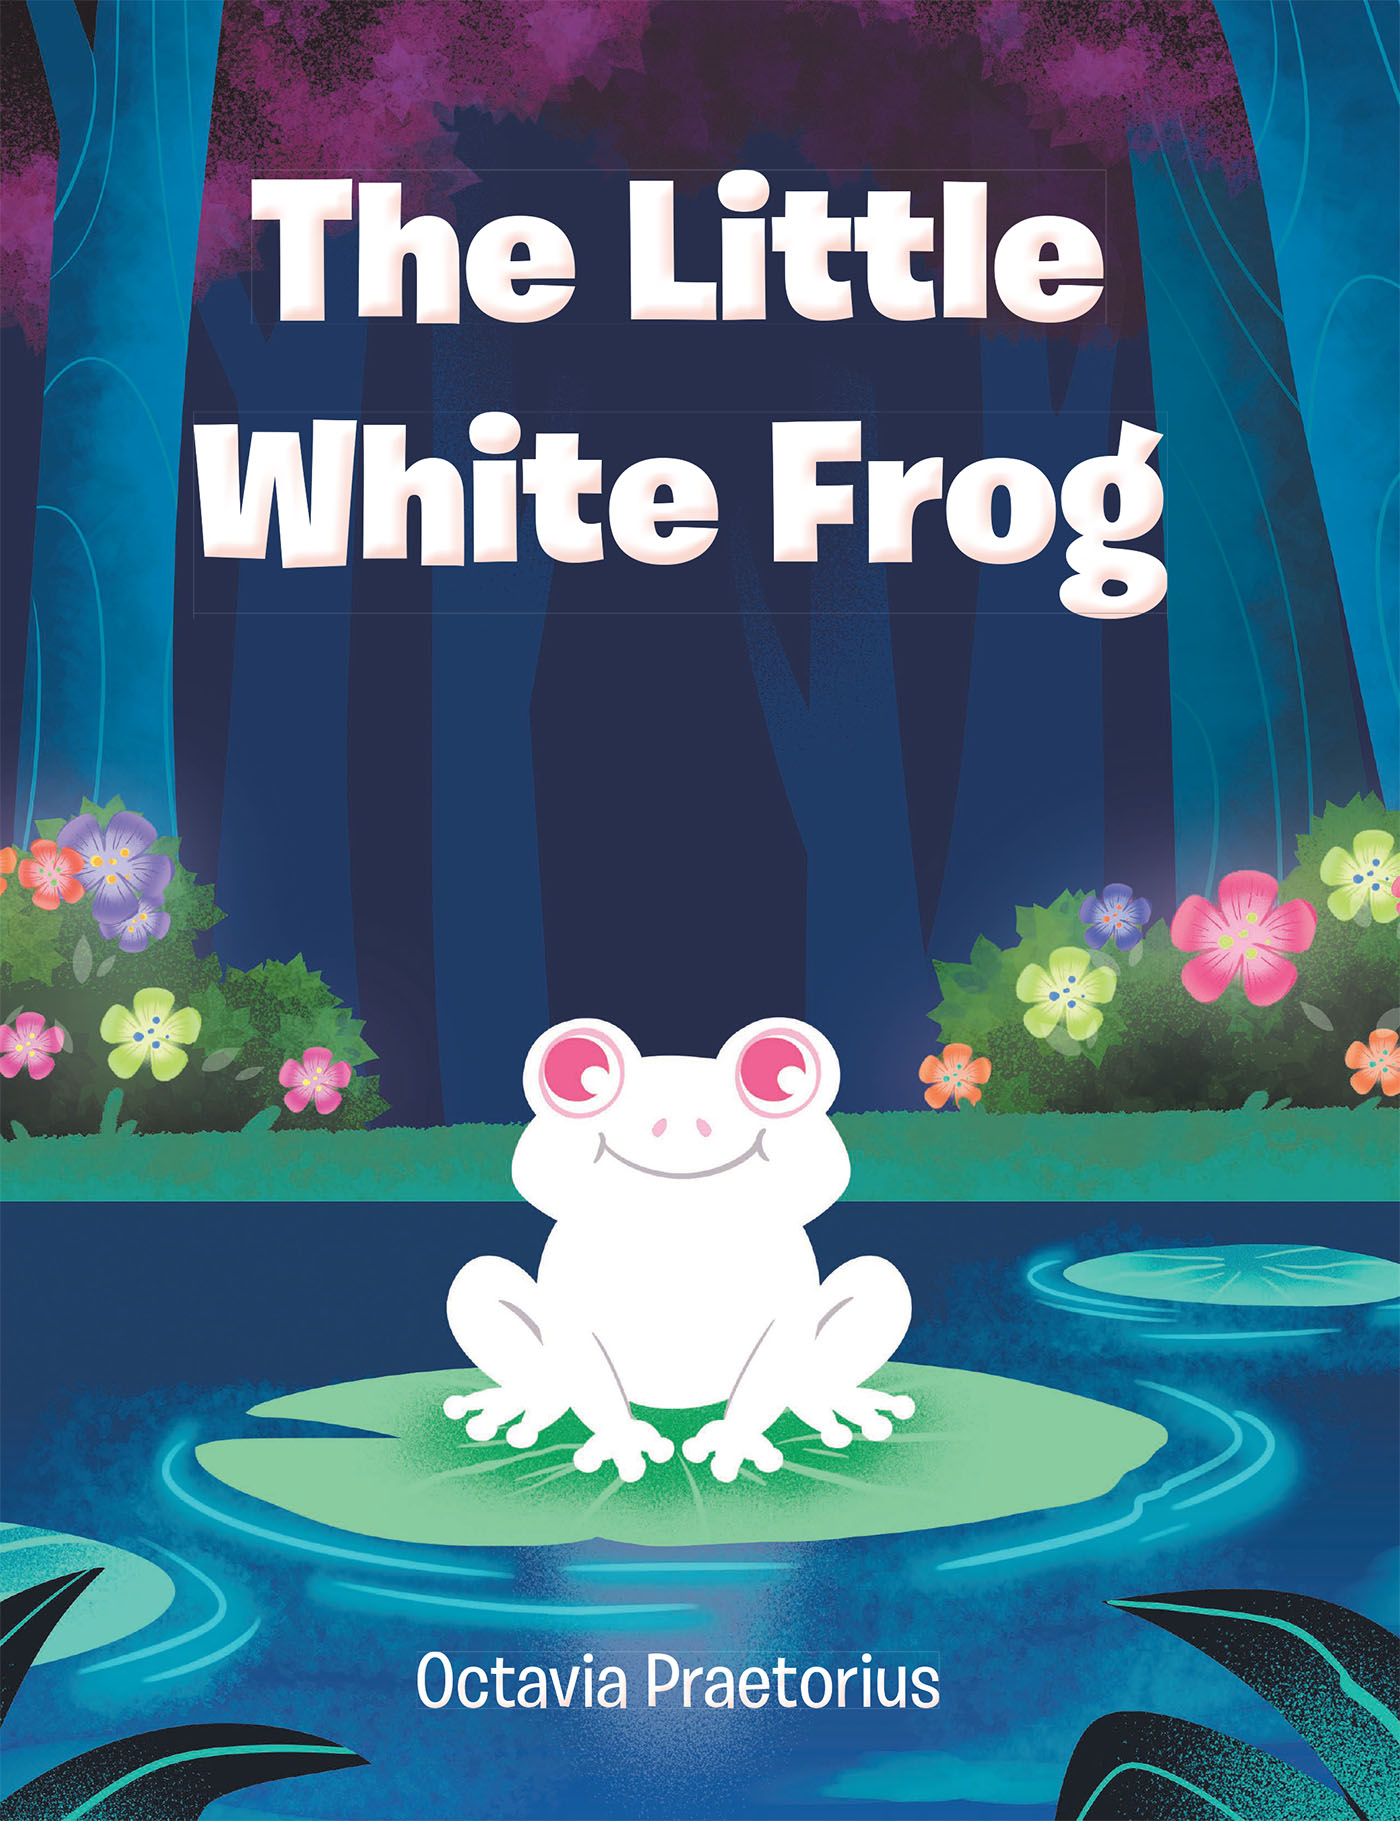 Octavia Praetorius’s Newly Released "The Little White Frog" is a Sweet Tale of a Little Frog on a Journey to Learn About the Wonder of Our Differences